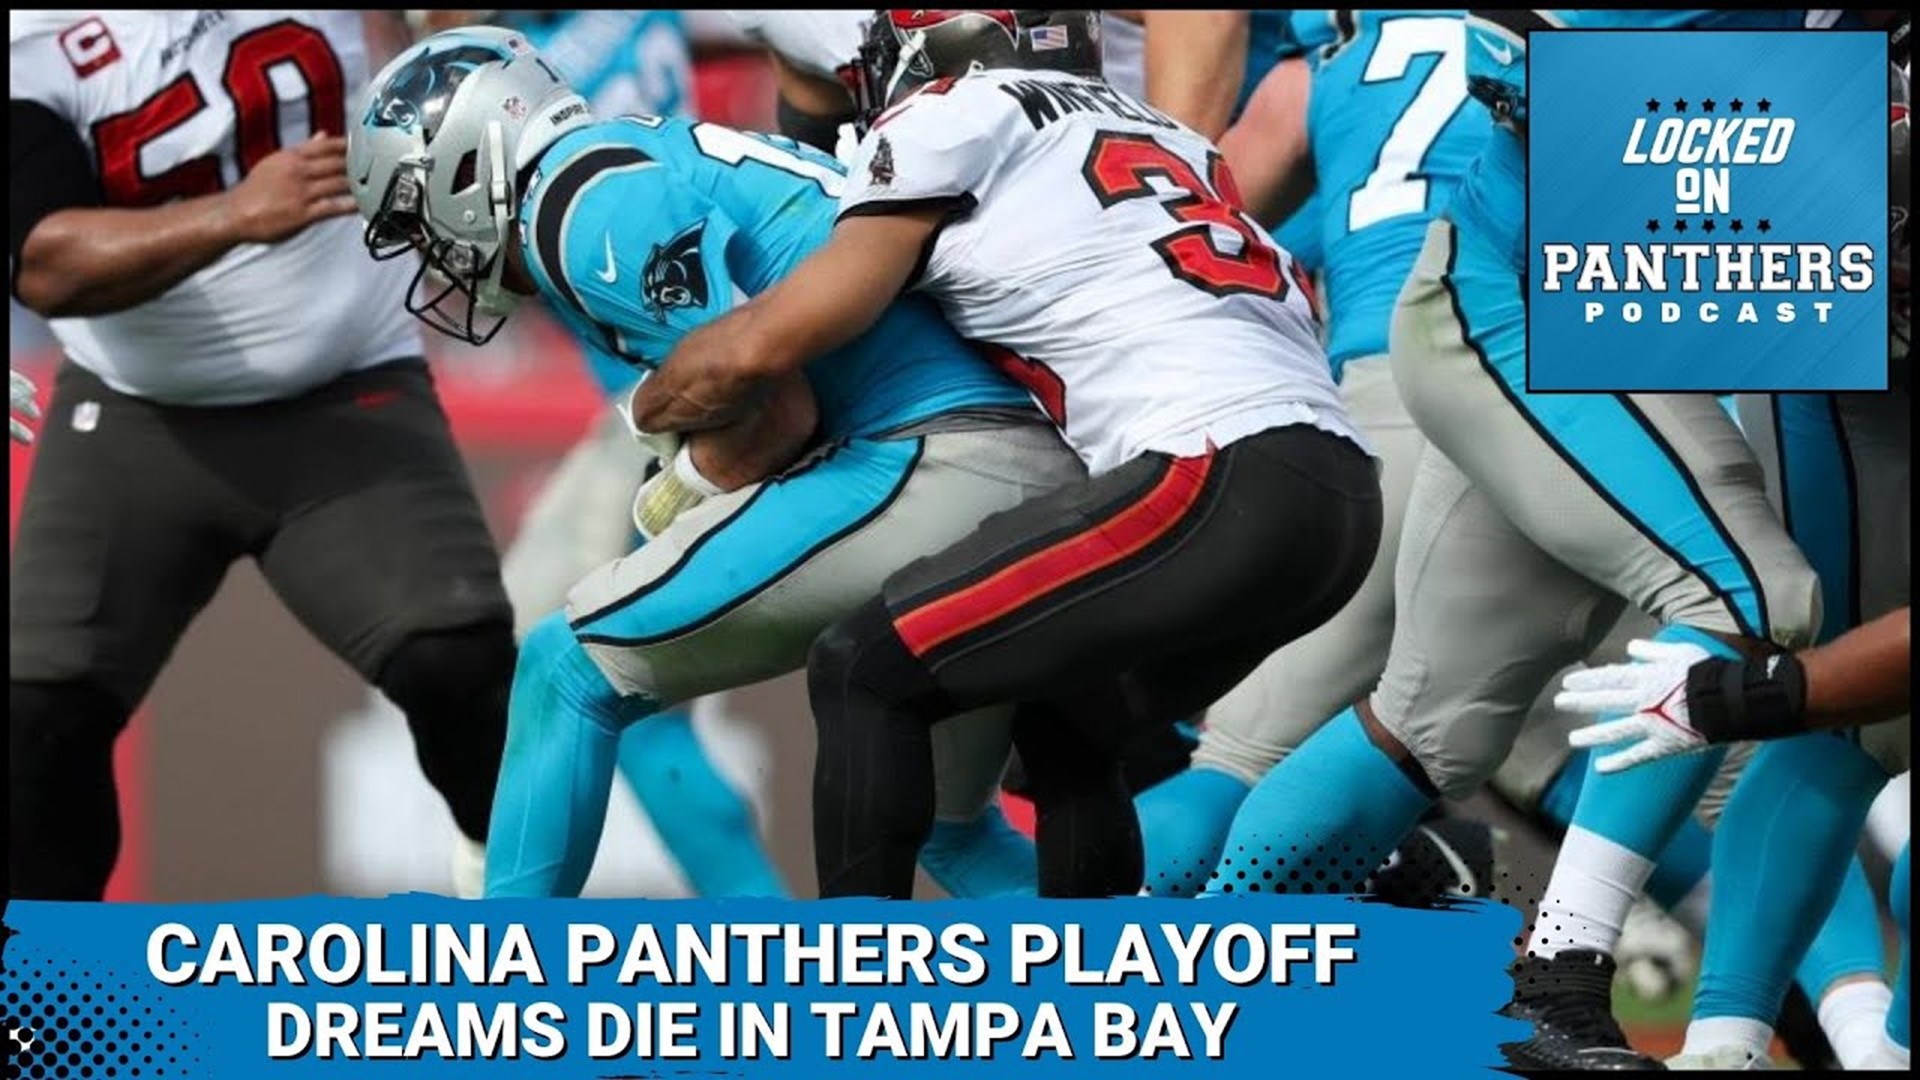 Carolina Panthers Playoff Dreams Die In Tampa Bay With, 30-24, Loss To The  Bucs, Locked on Panthers